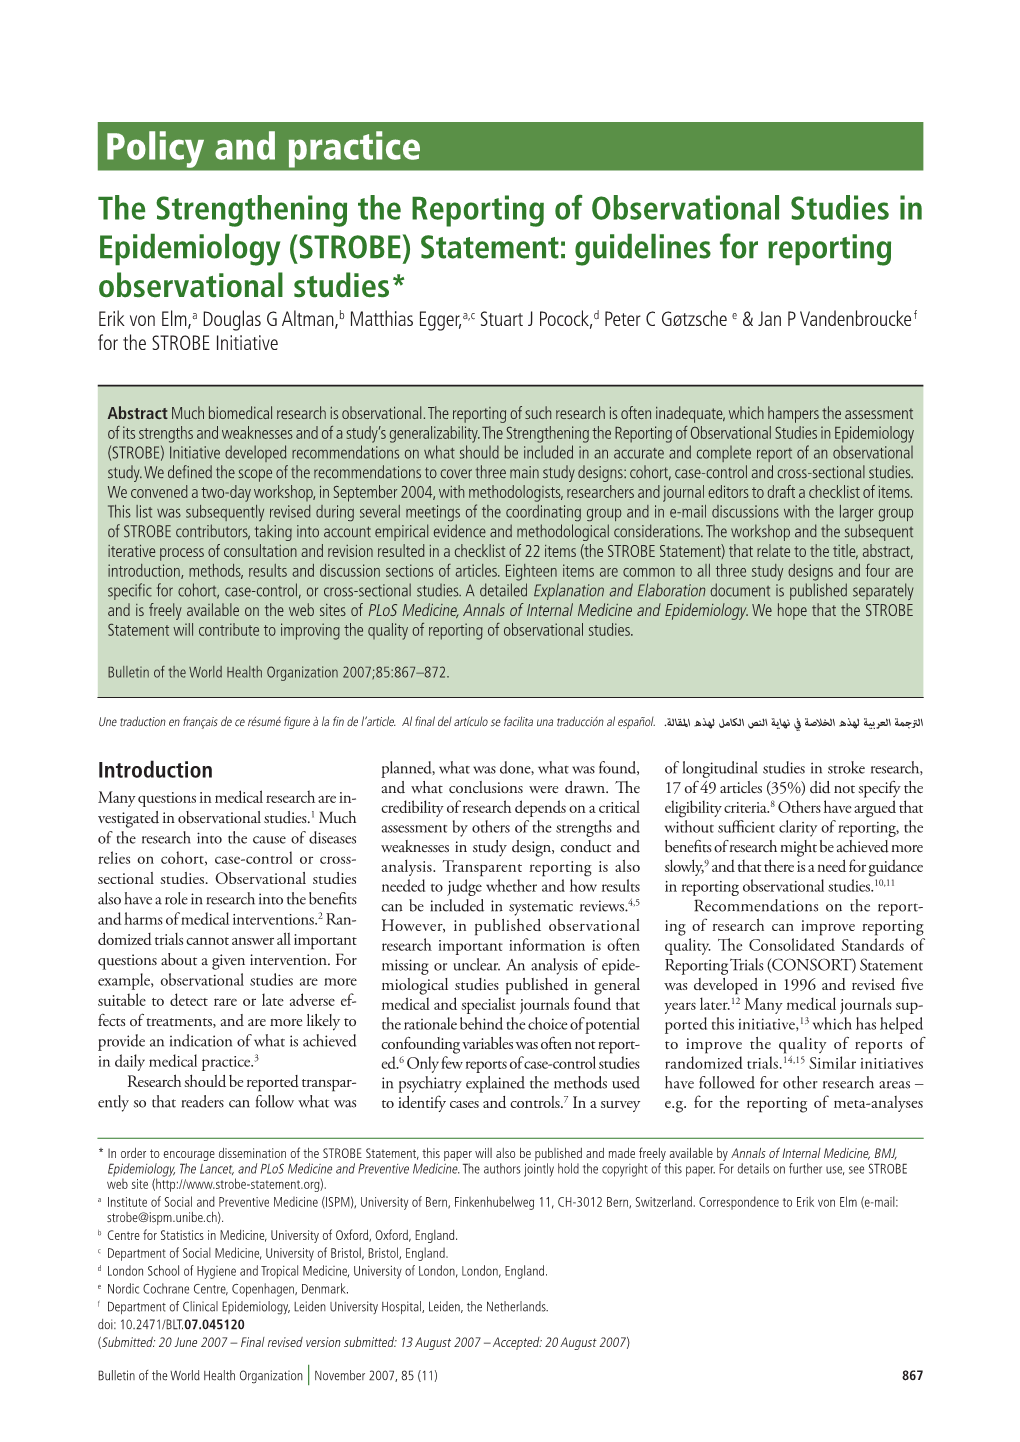 (STROBE) Statement: Guidelines for Reporting Observational Studies